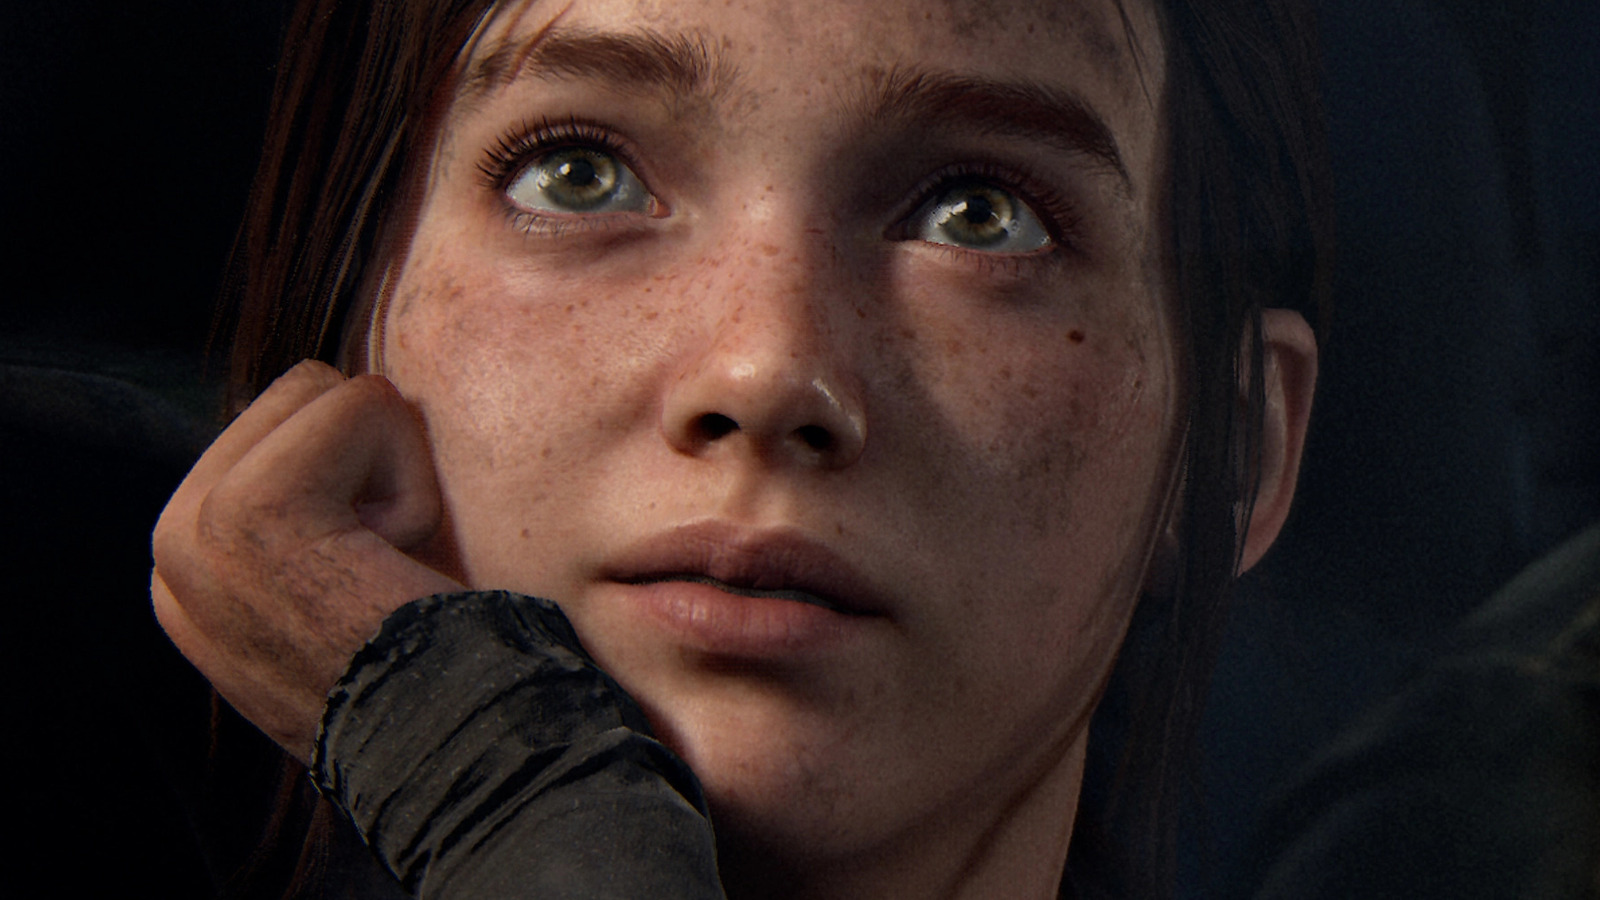 The Last of Us remake confirms Joel's age